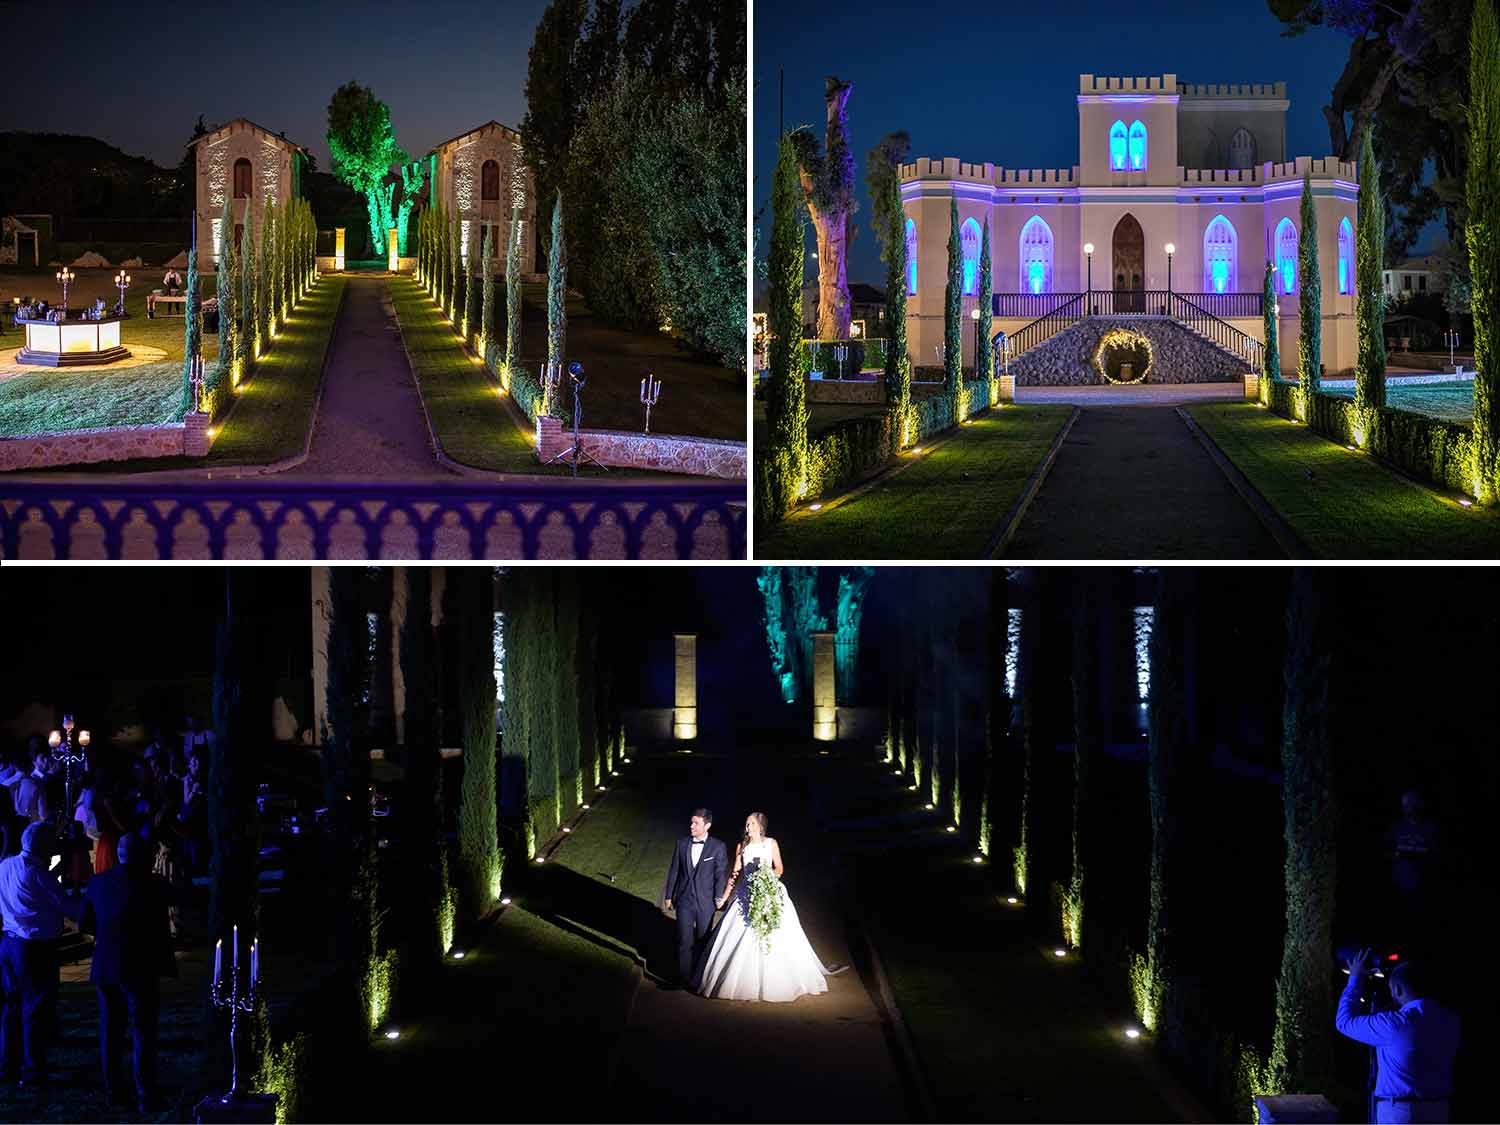 Luxurious Wedding Decoration at the entrance of a Castle in Greece